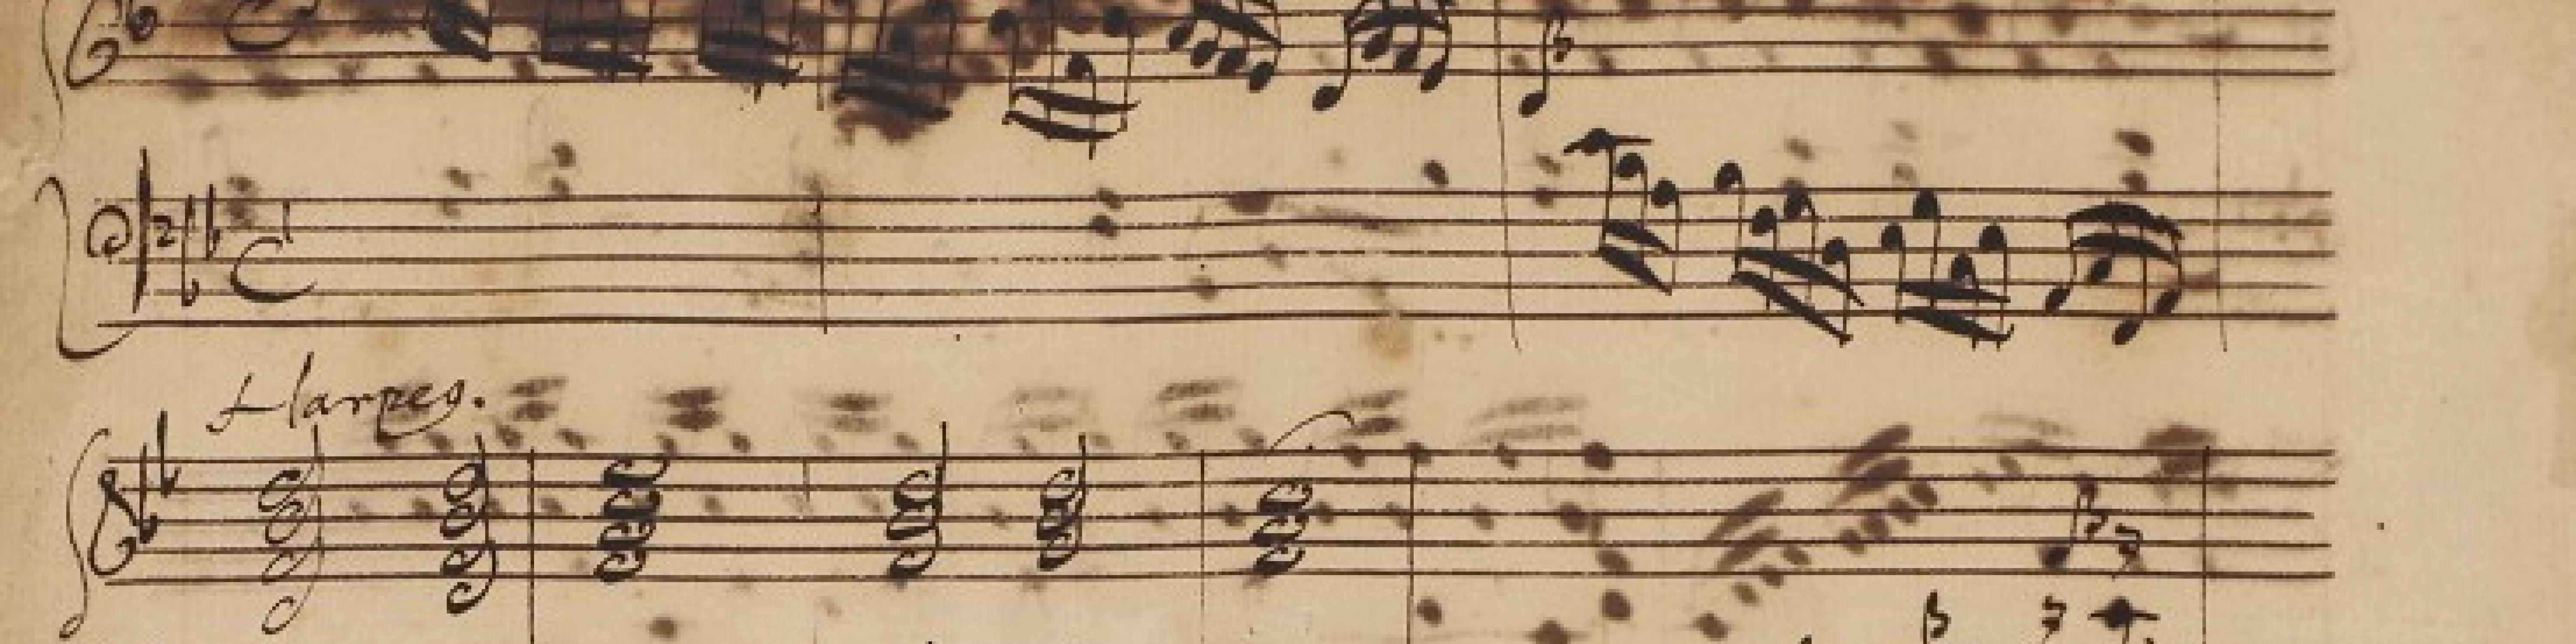 Opening bars of a manuscript of a new prelude for Handel's Suite HWV 434, in the composer's hand.